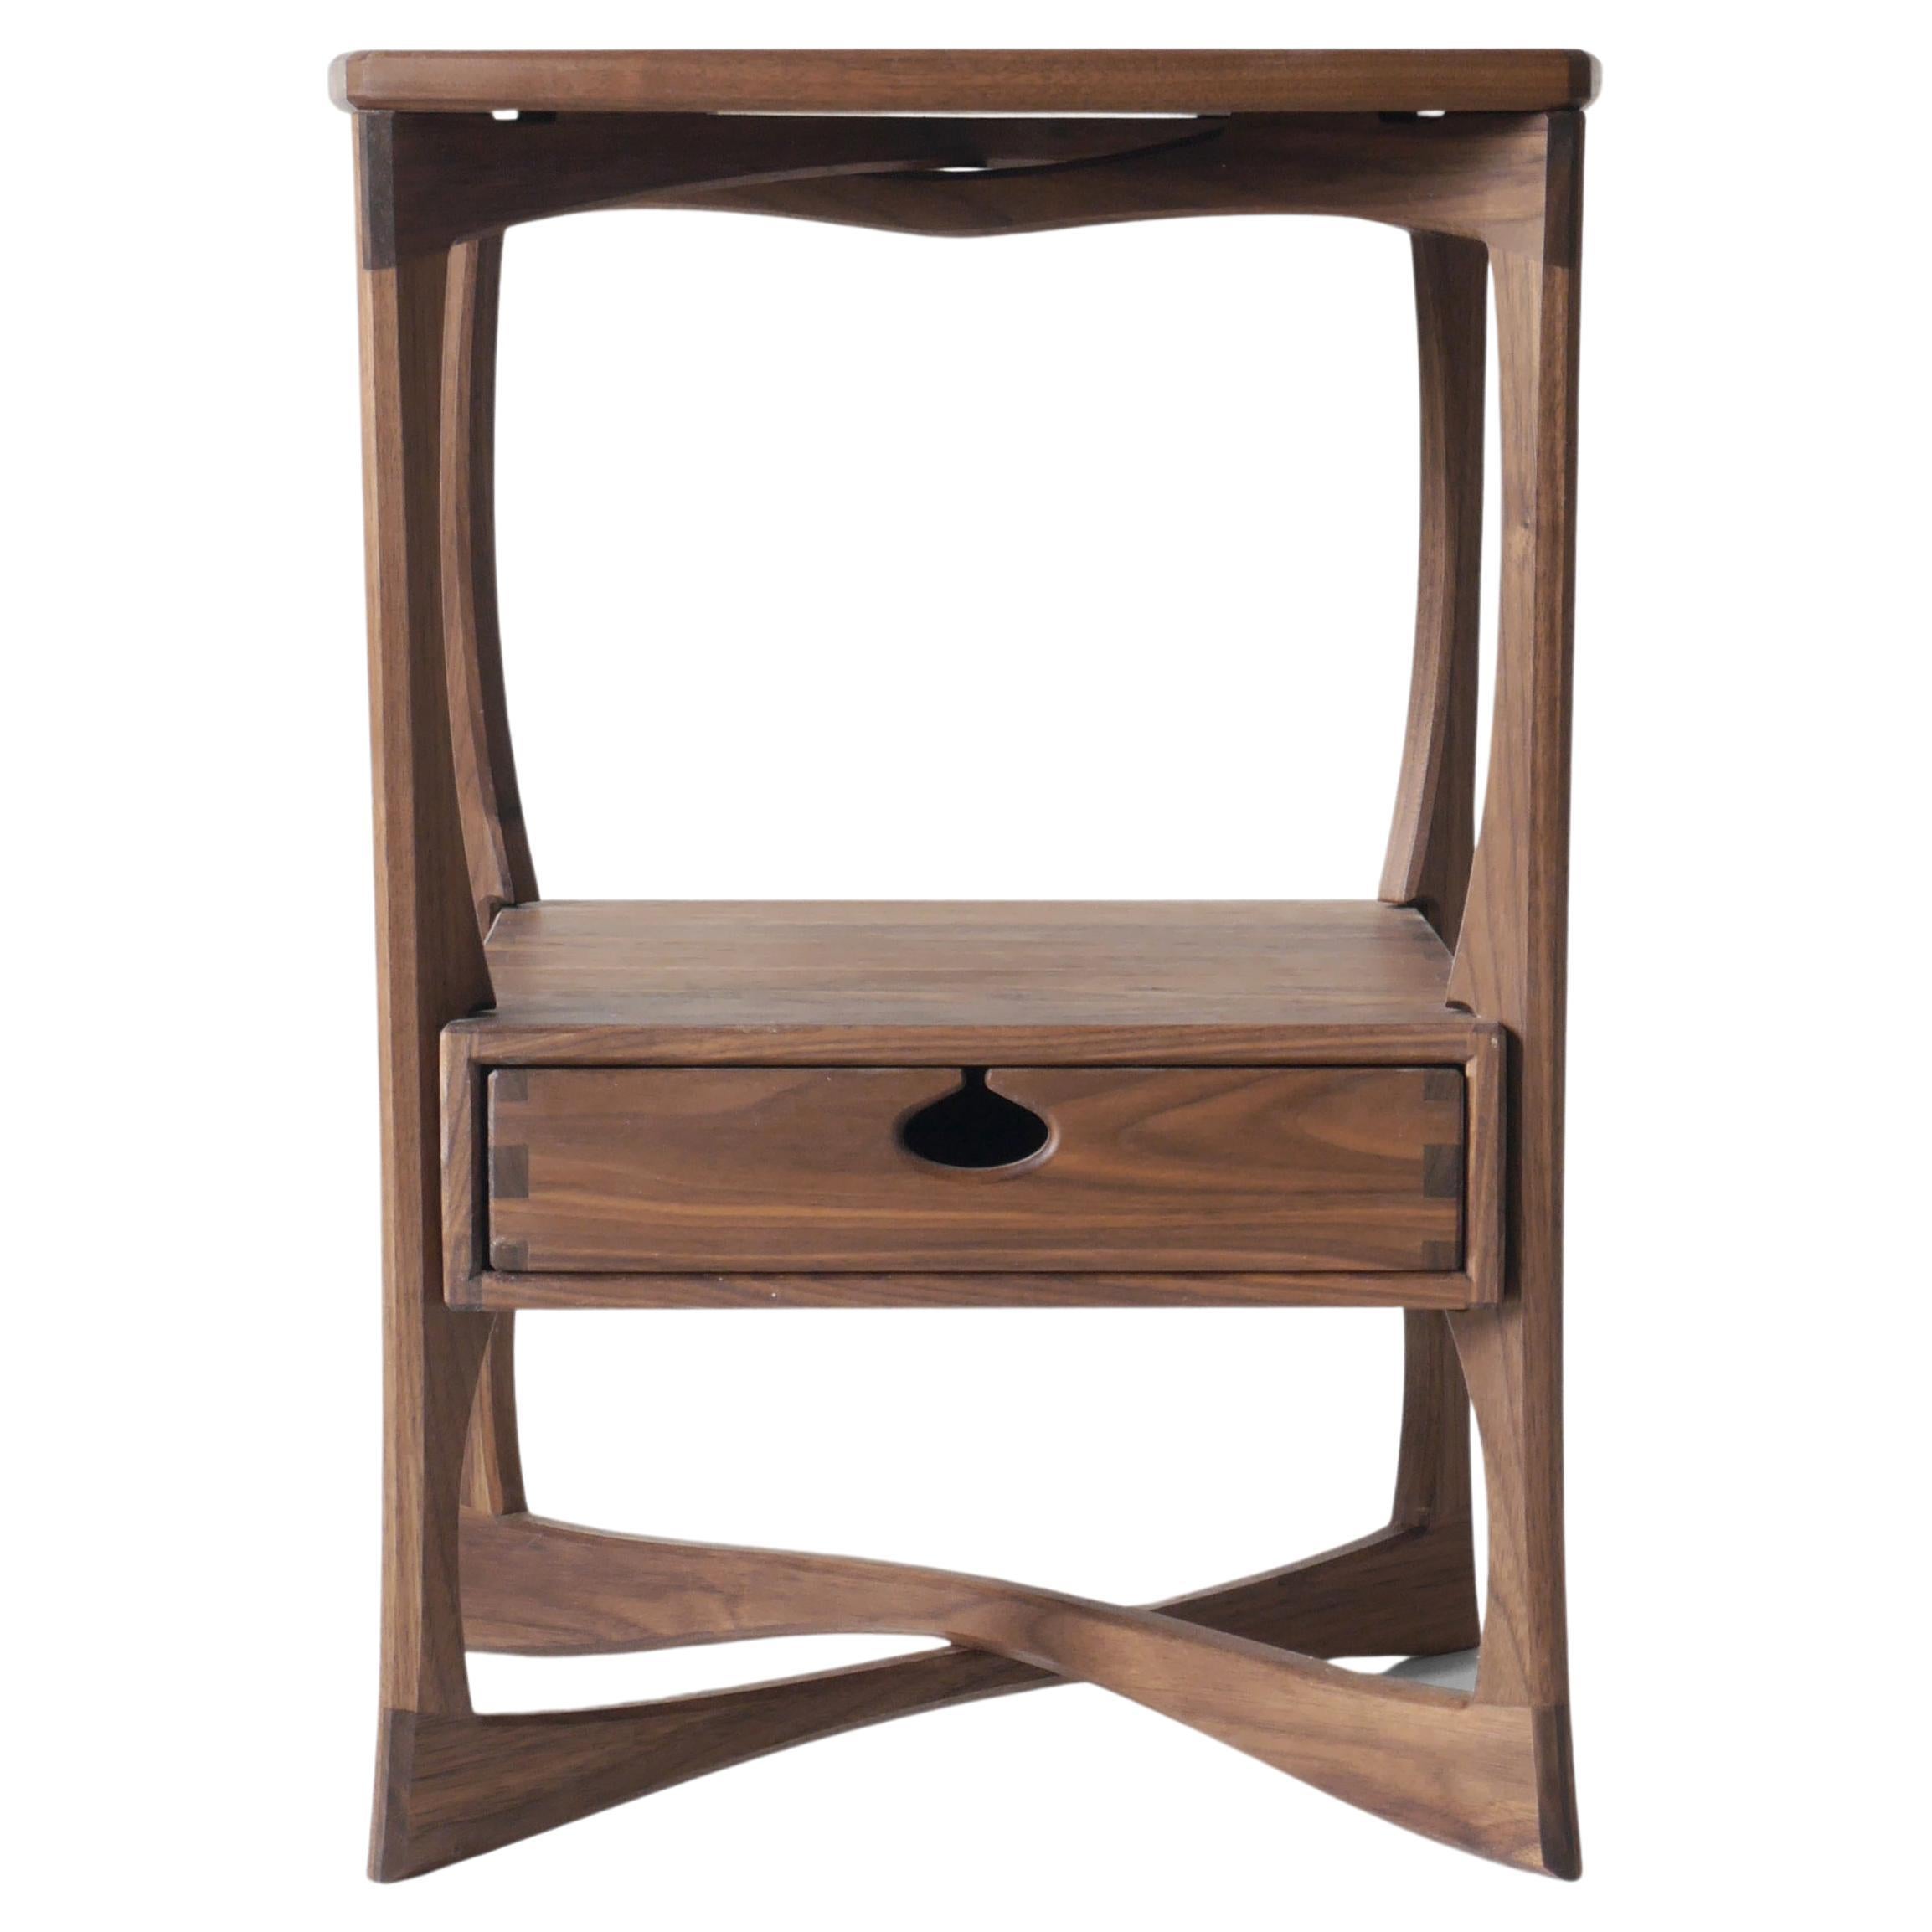 Walnut Roke Side Table, Modern End Table / Nightstand with one Drawer by Arid